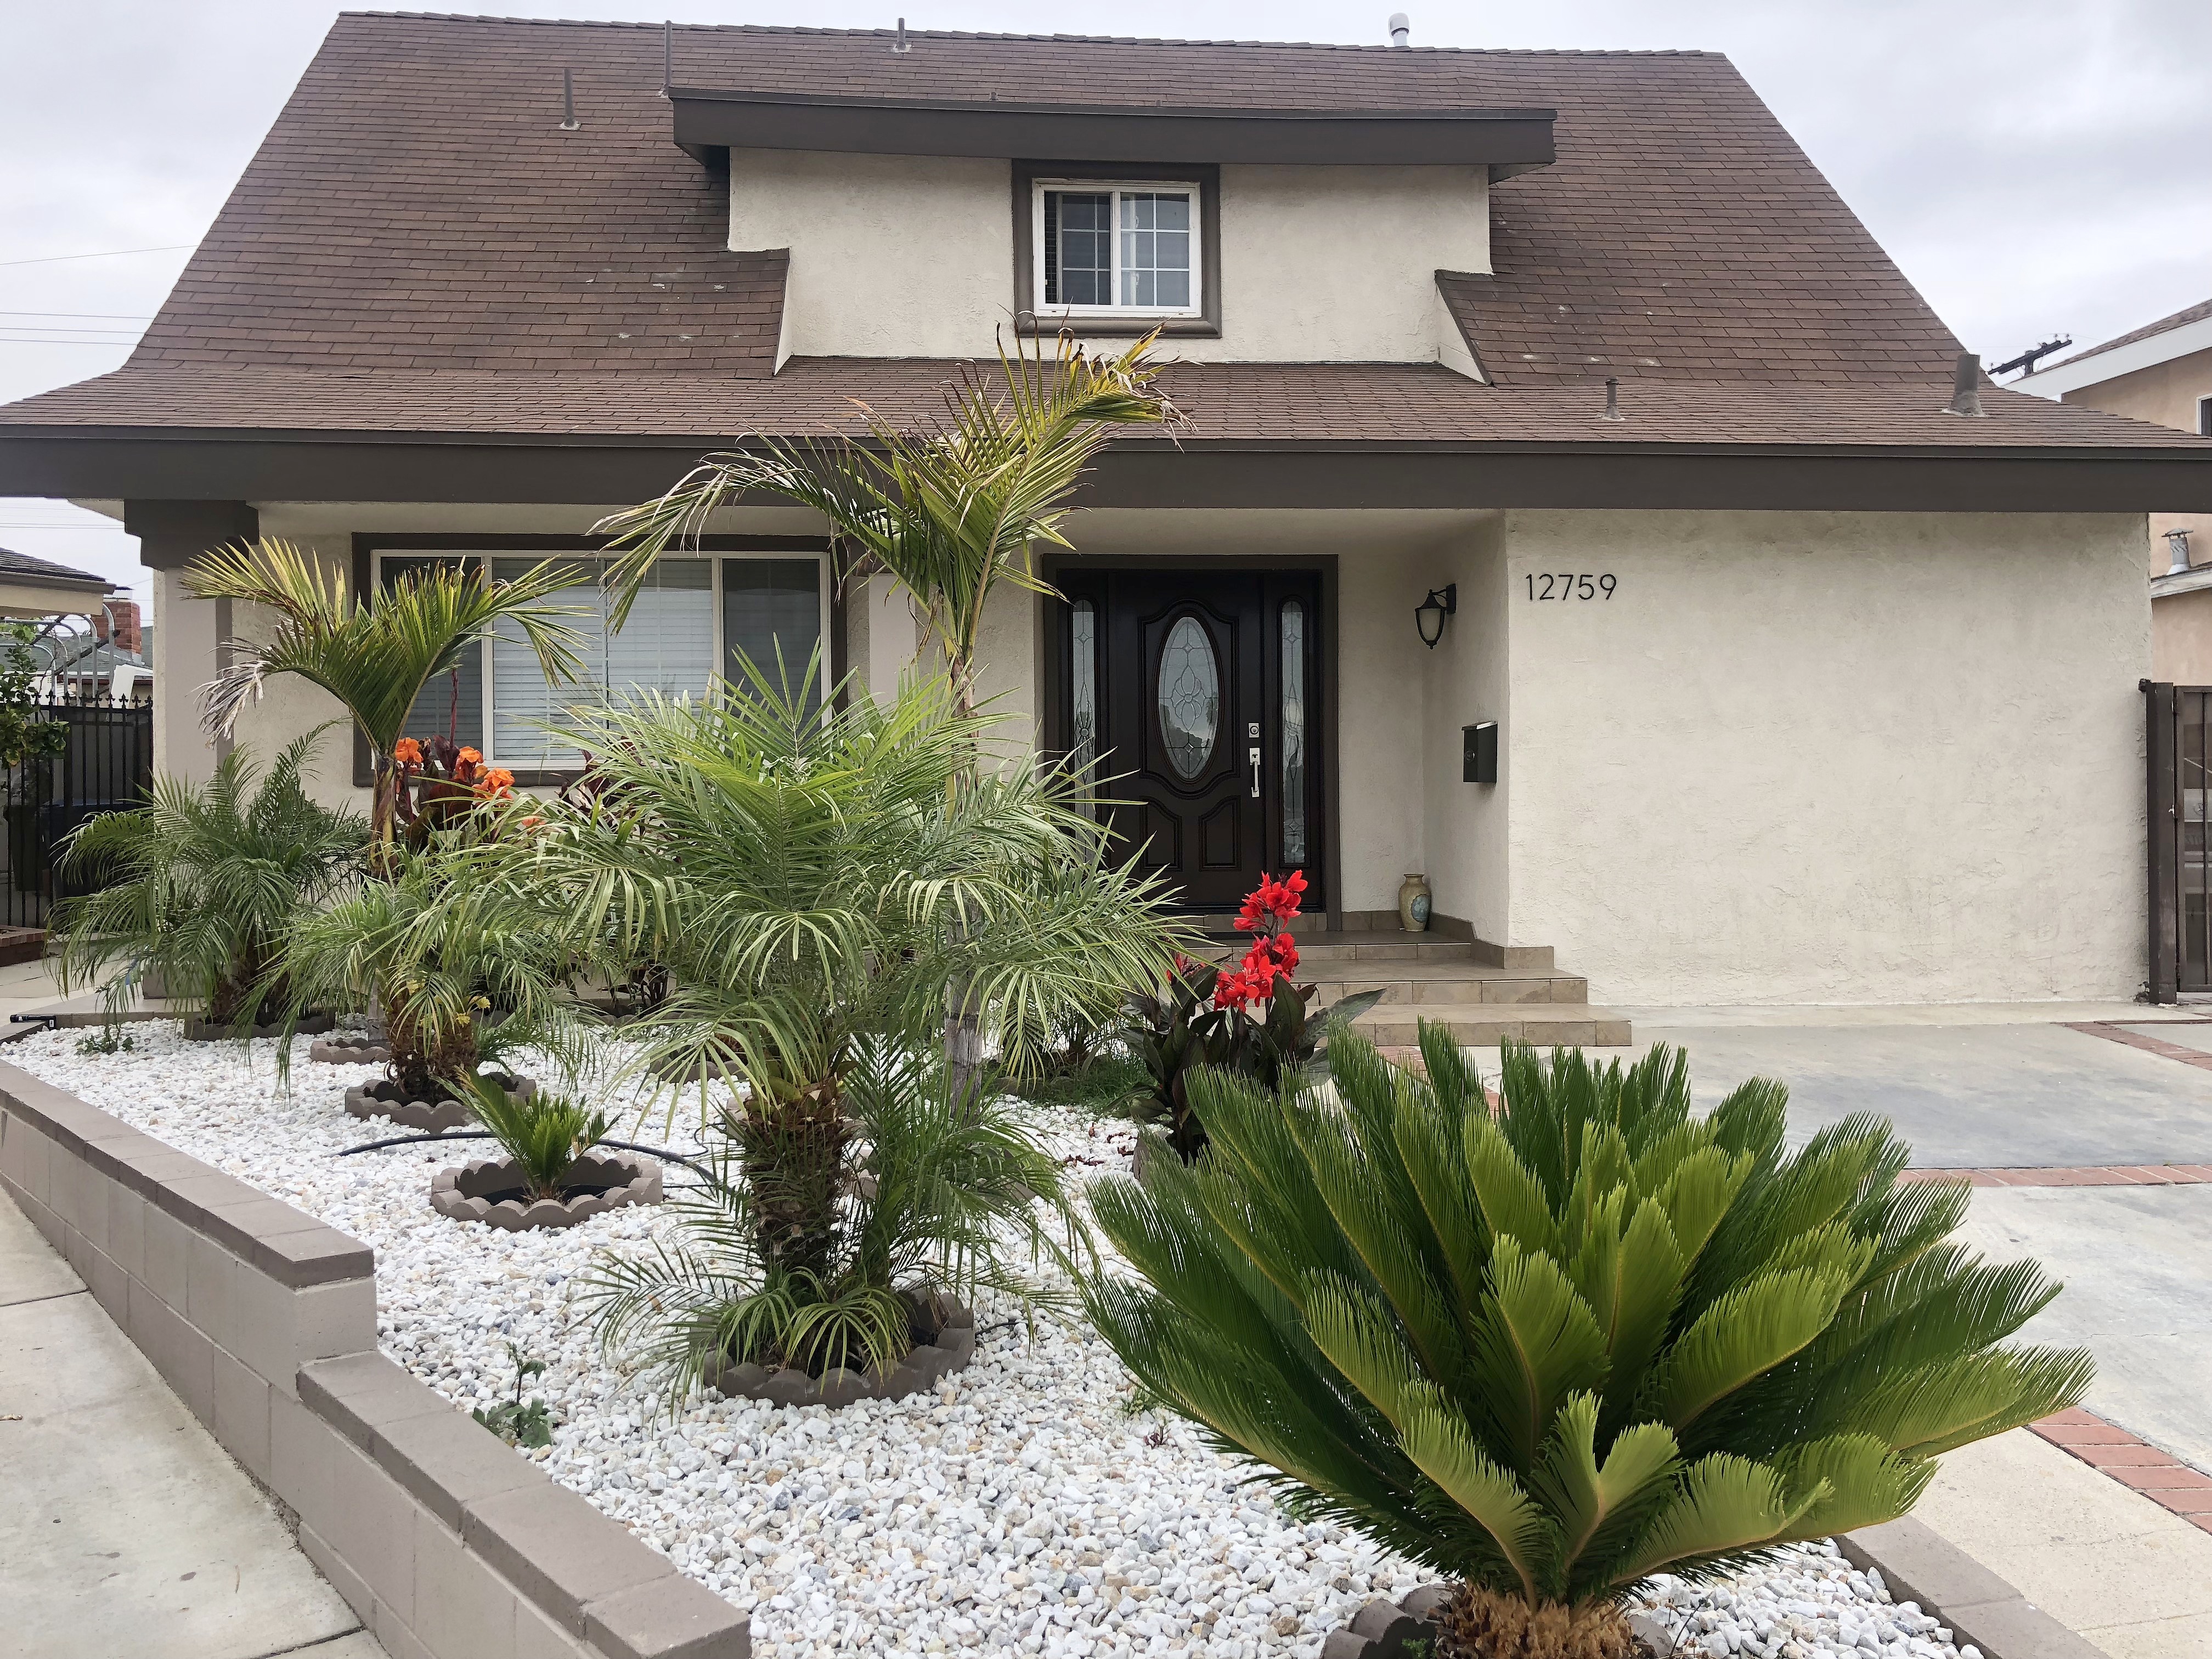 3 Bedrooms / 3 Bathrooms - Est. $5,996.00 / Month* for rent in North Hollywood, CA